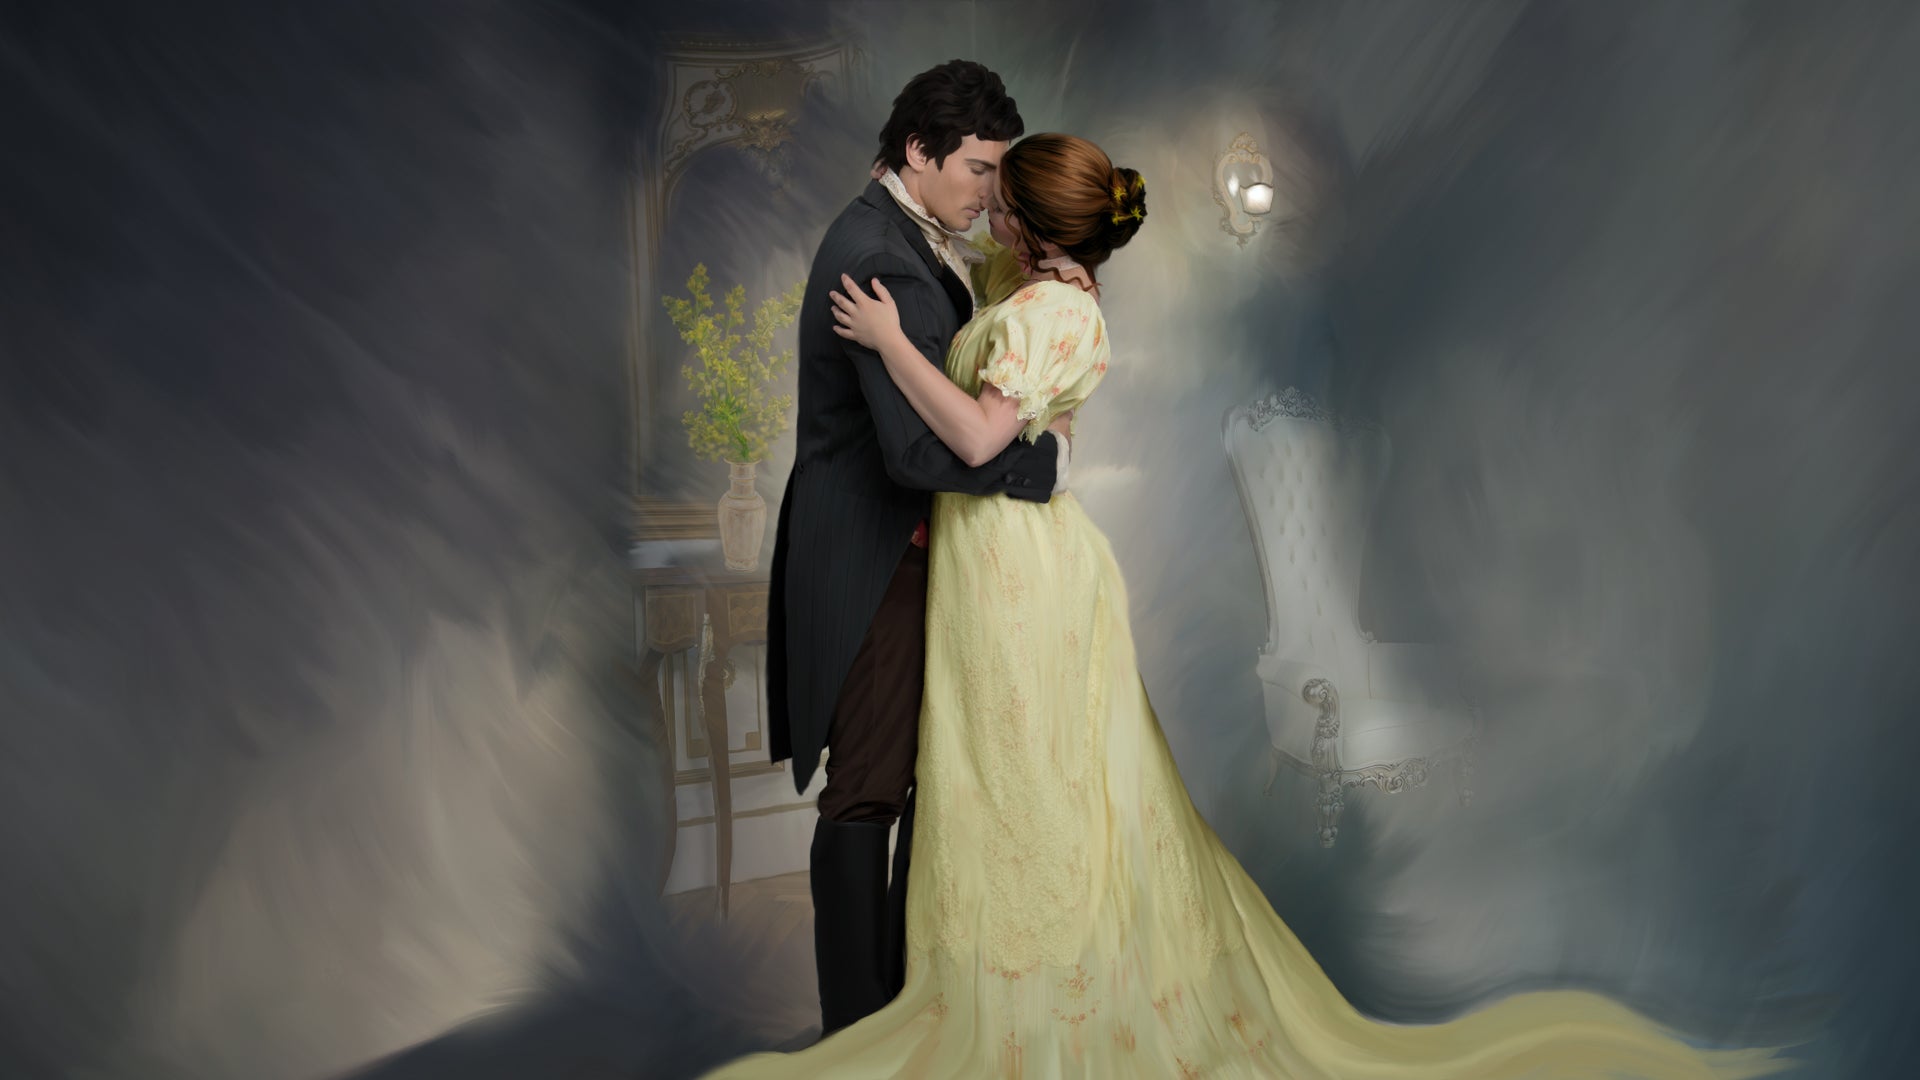 Scent of Desire A Pride and Prejudice Expansion by Emmaline Hoffmeister (Cover Art)